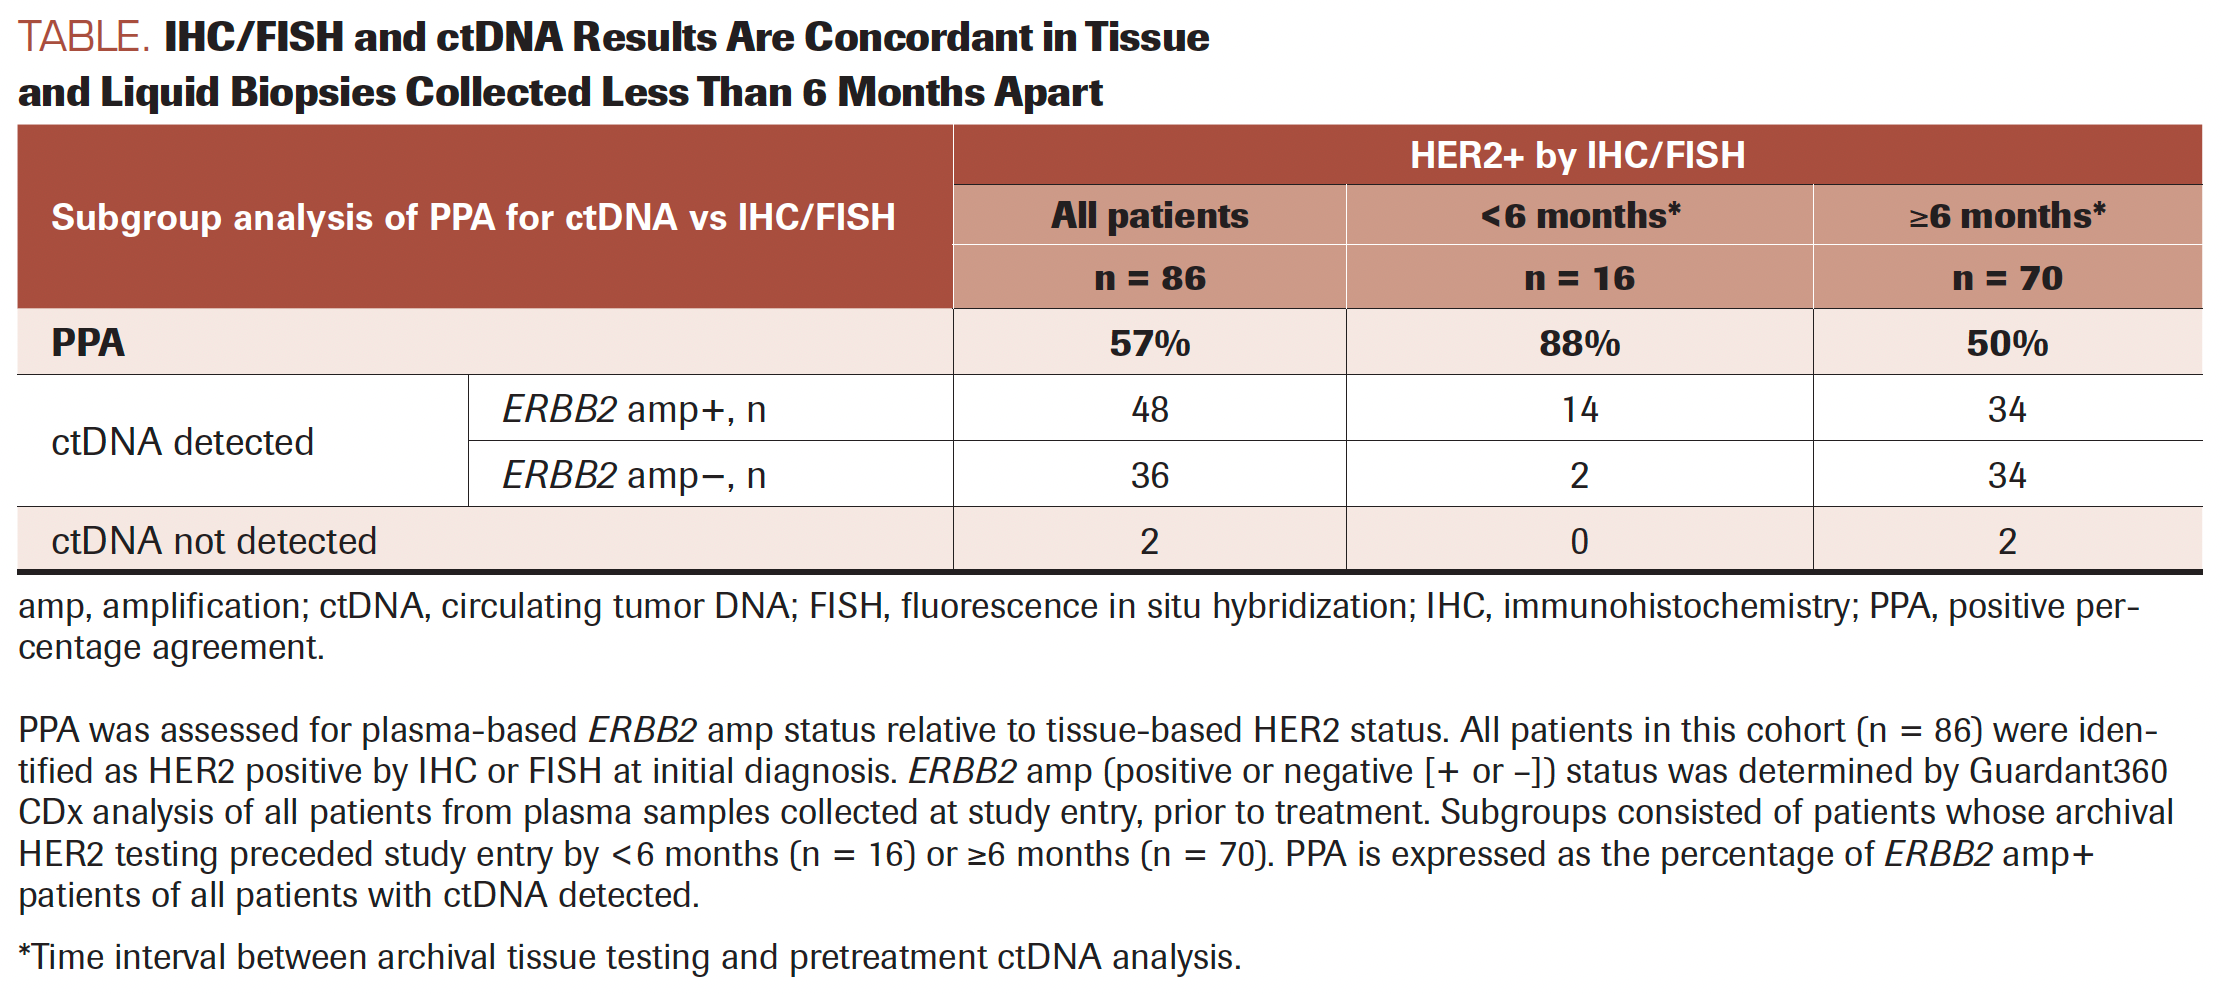 TABLE. IHC/FISH and ctDNA Results Are Concordant in Tissue and Liquid Biopsies Collected Less Than 6 Months Apart